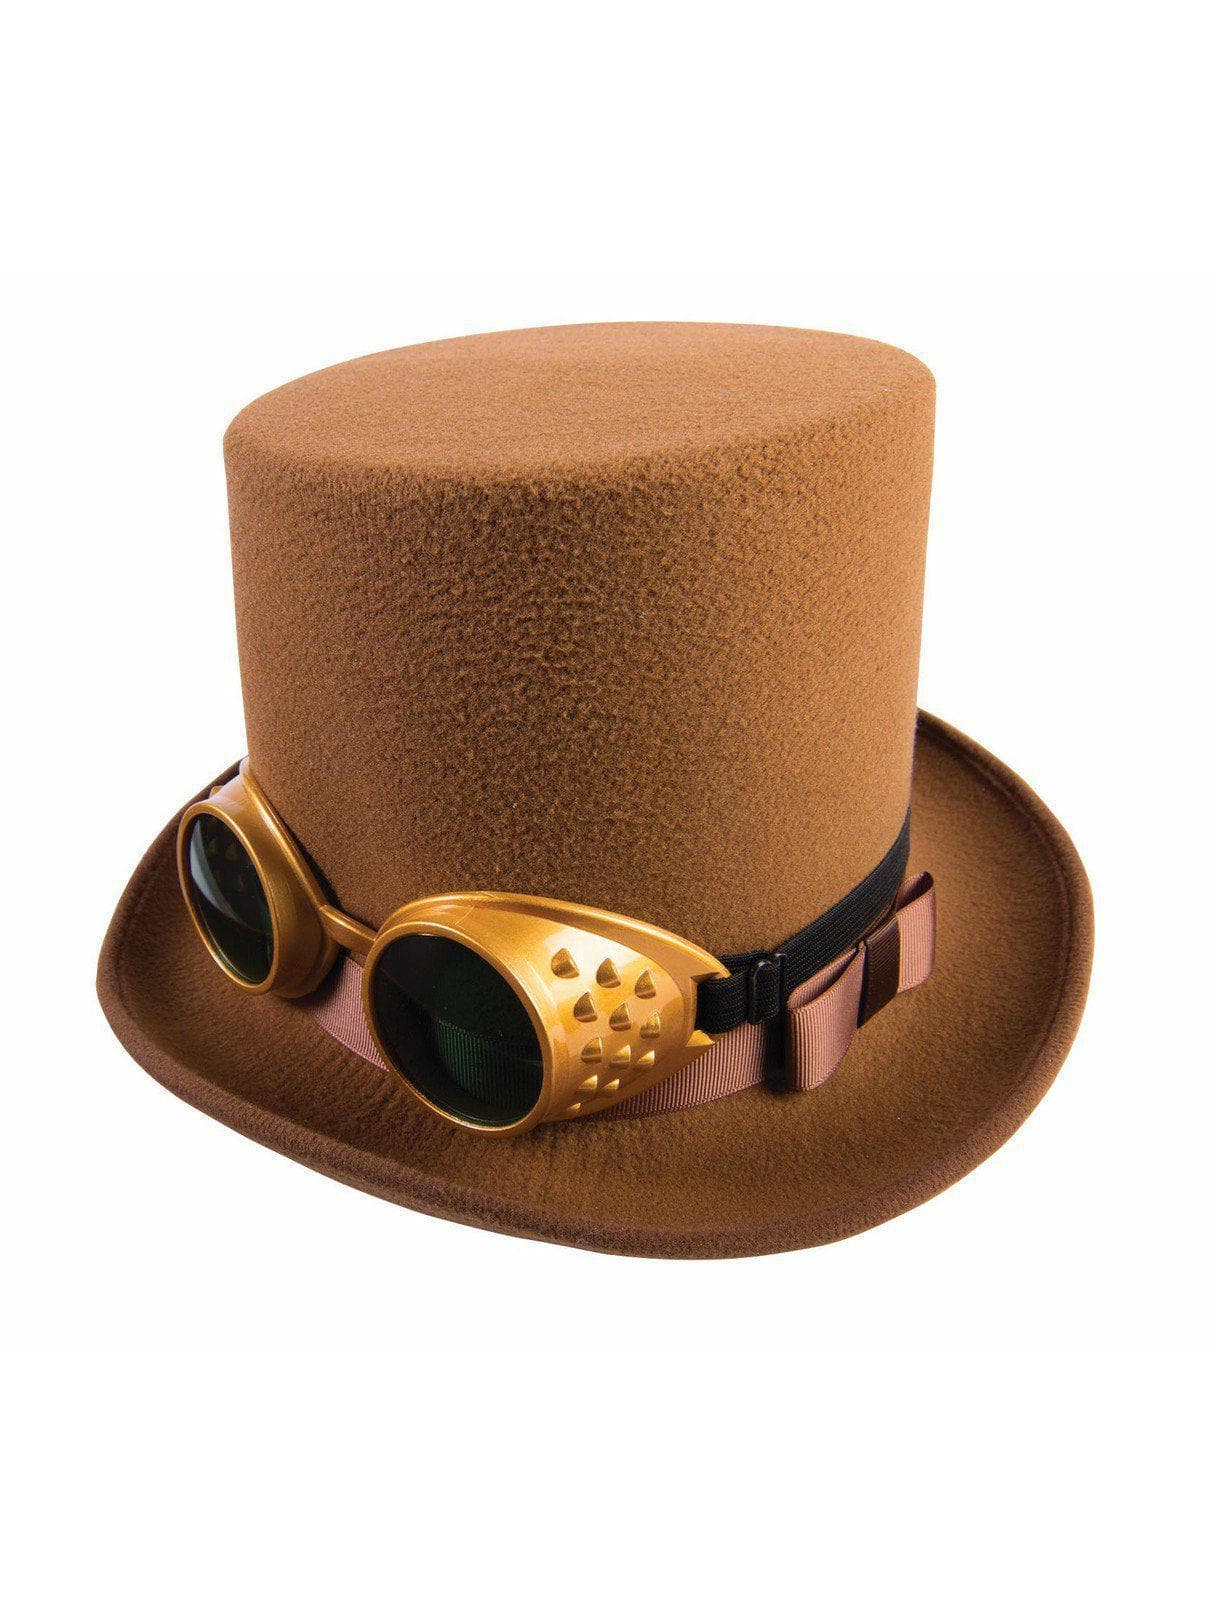 Adult Brown Steampunk Top Hat with Goggles - costumes.com